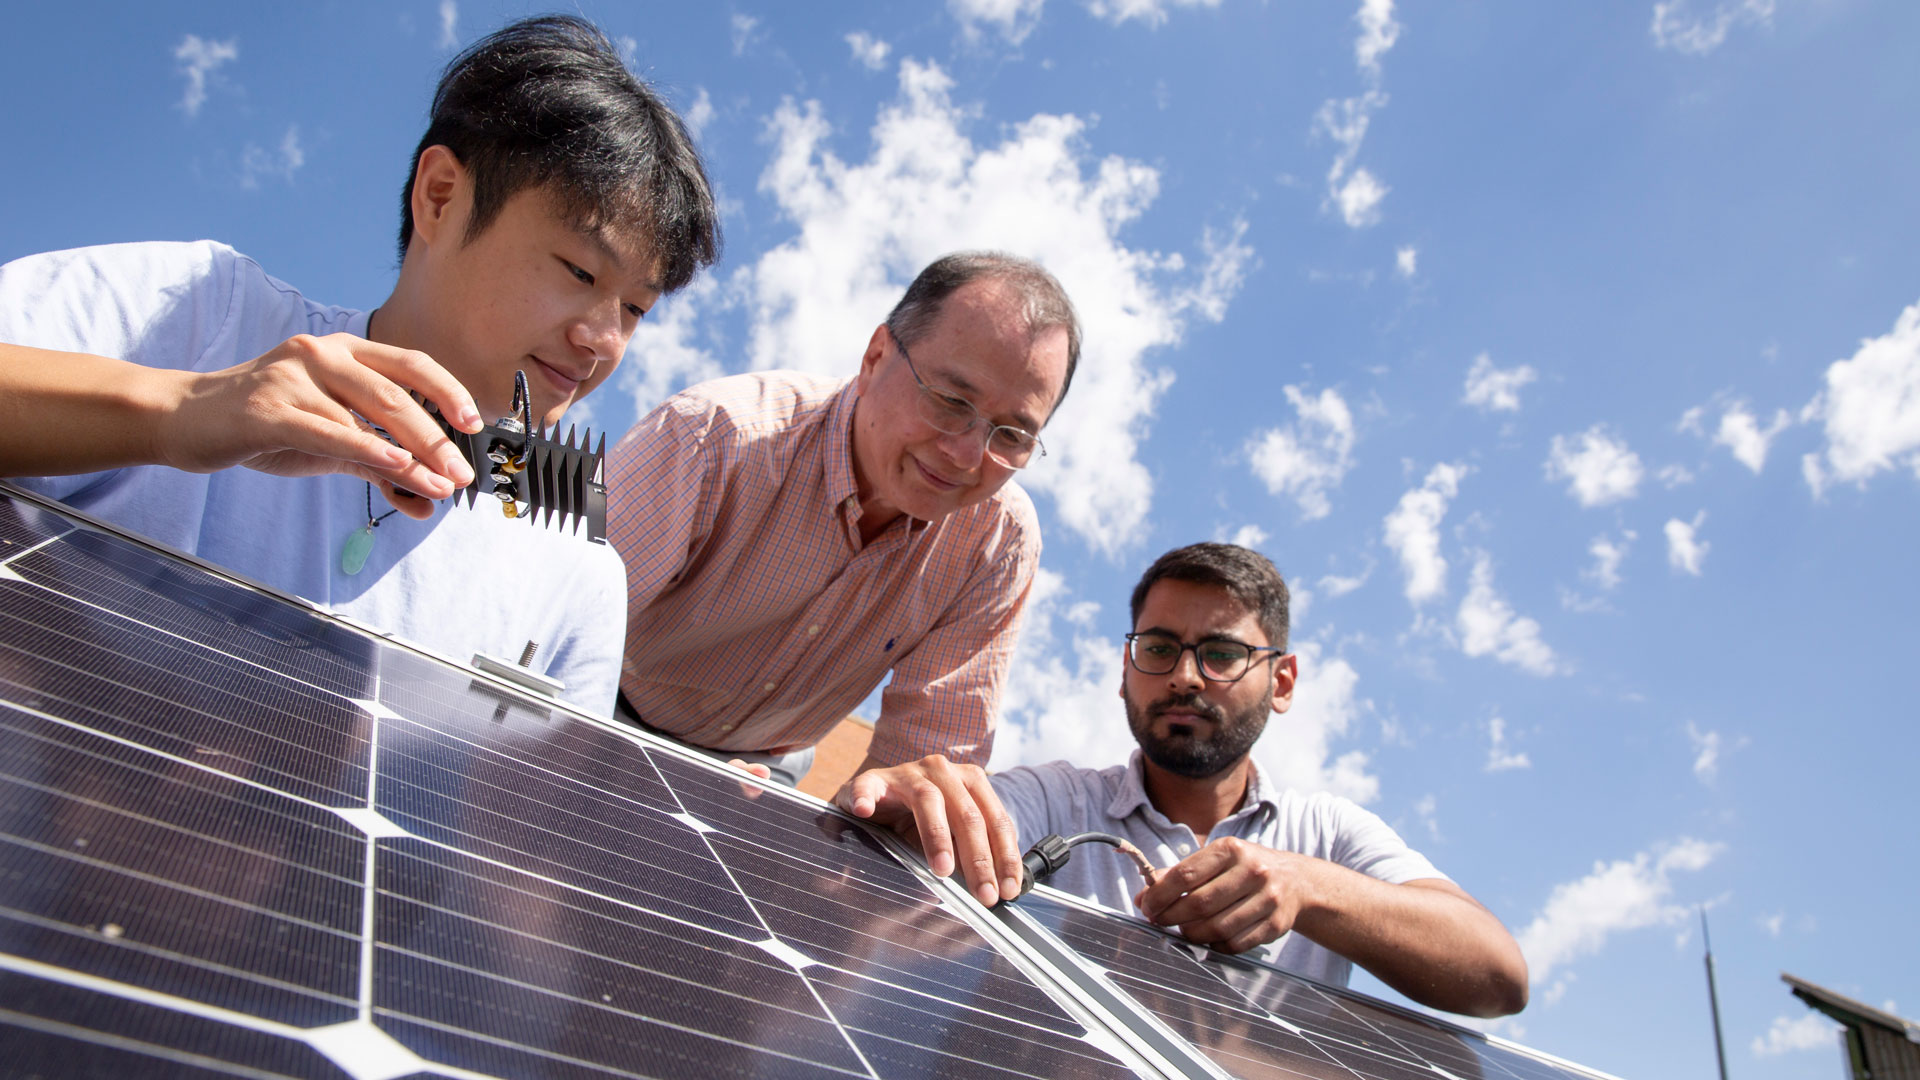 Meng Tao and Mike Ranjram with a student working on solar panels